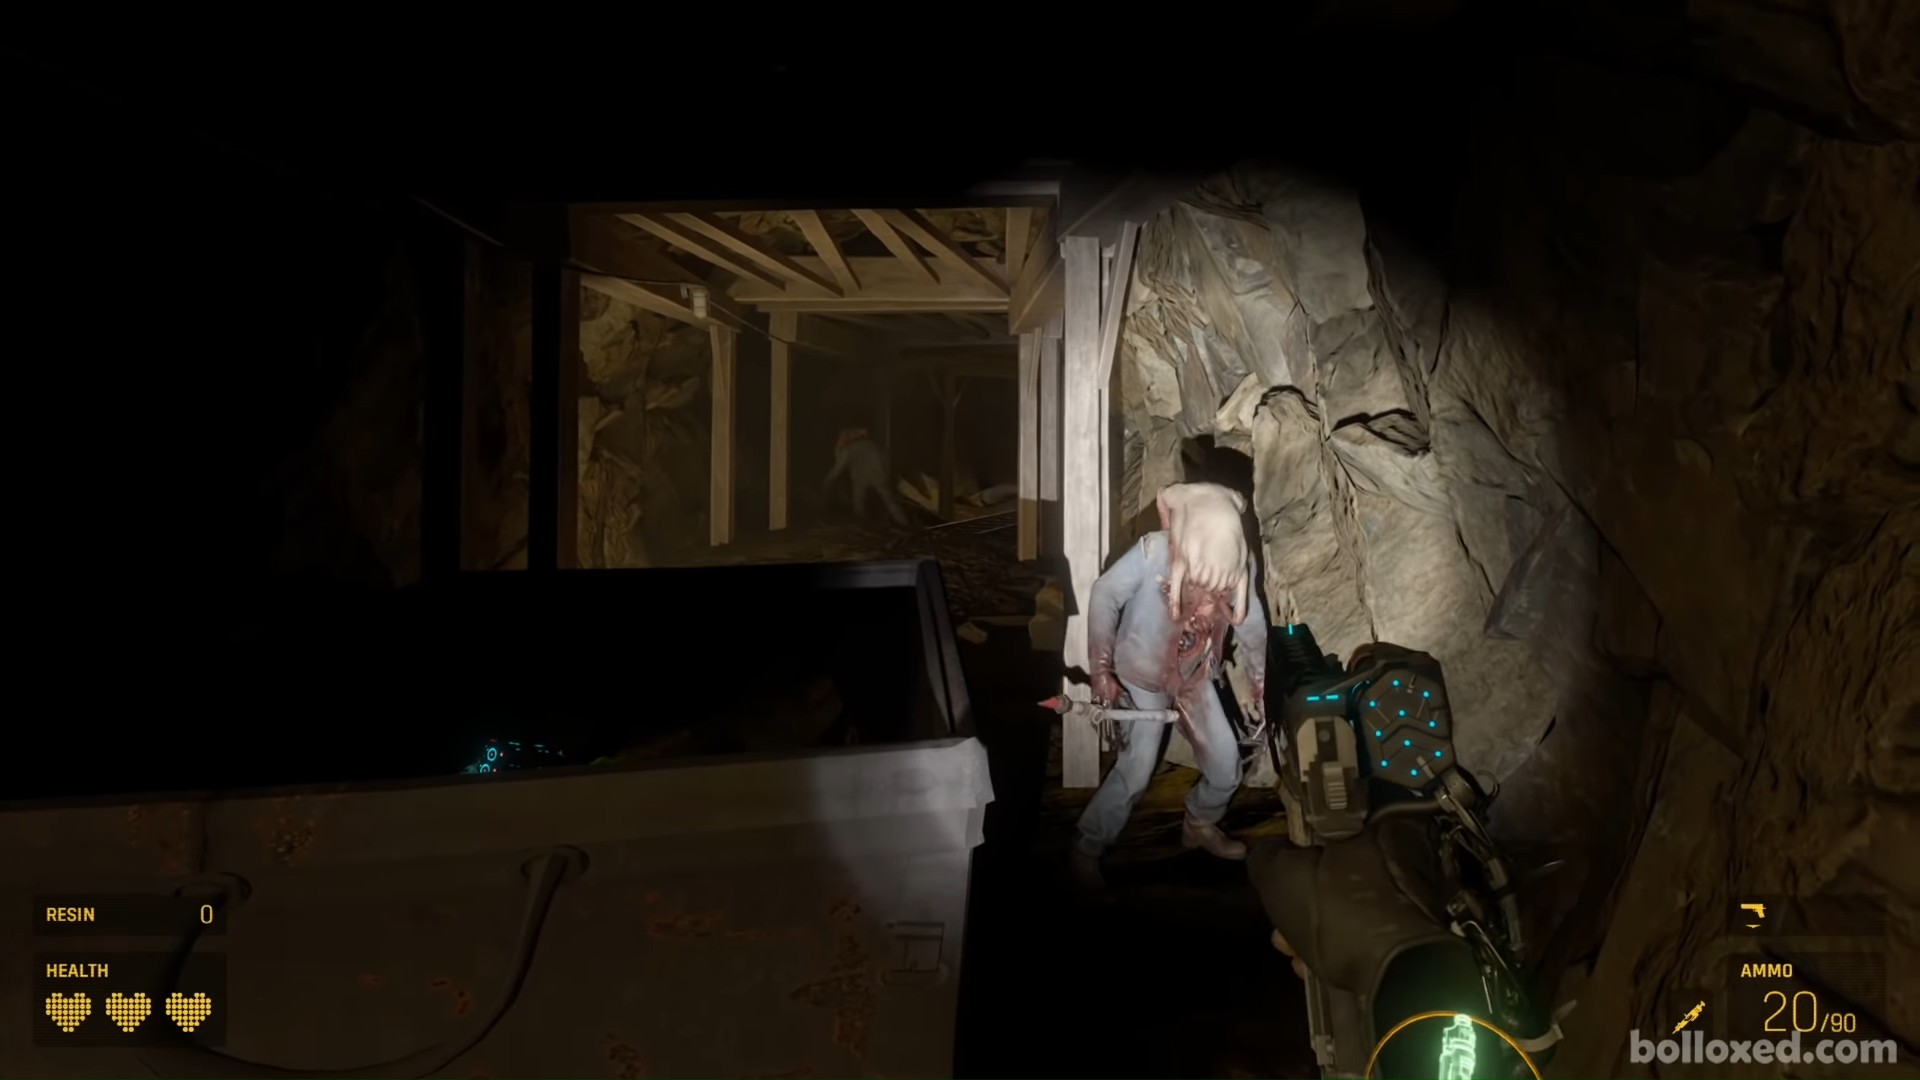 Half-Life: Alyx Will Feature VR Horror Sections